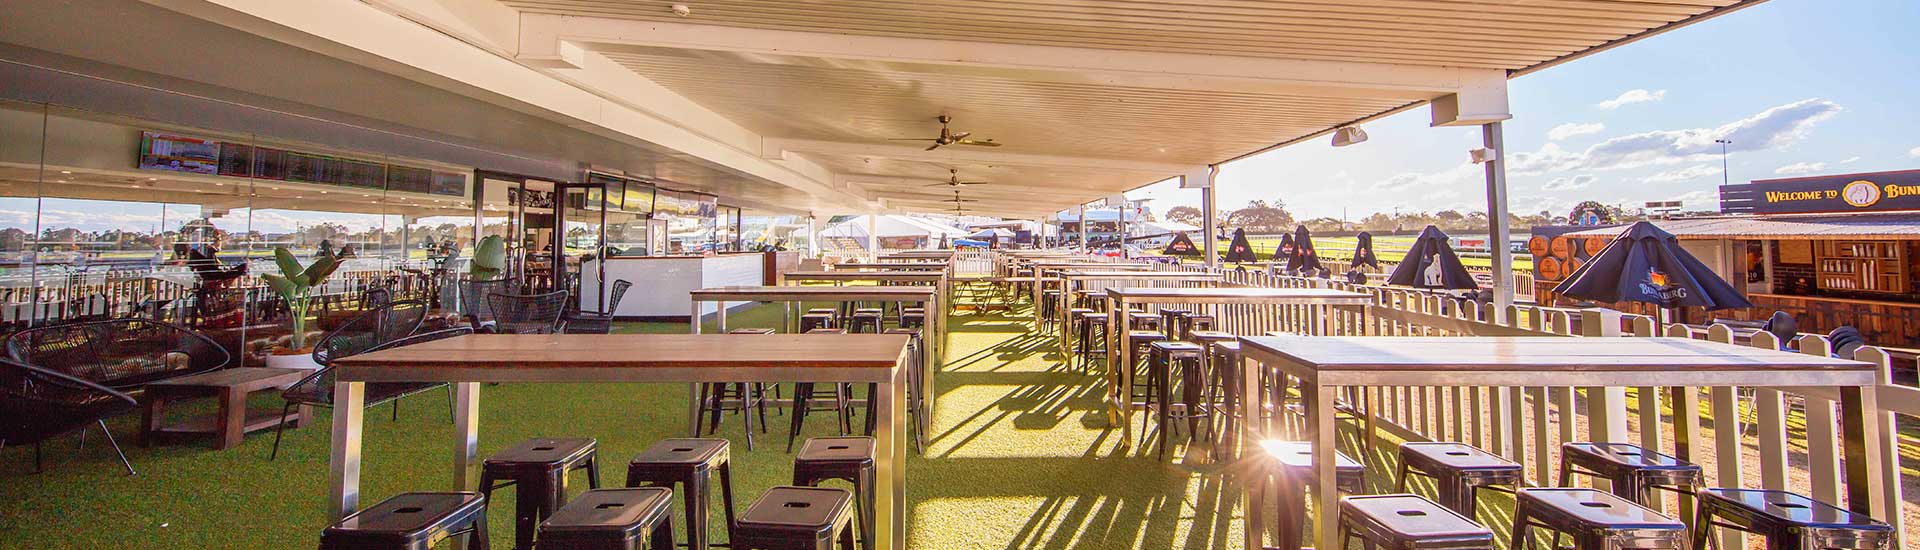 Champions Bar and Courtyard is the perfect location for your function, offering trackside views with contemporary furnishings, a permanent bar and large spacious courtyard.